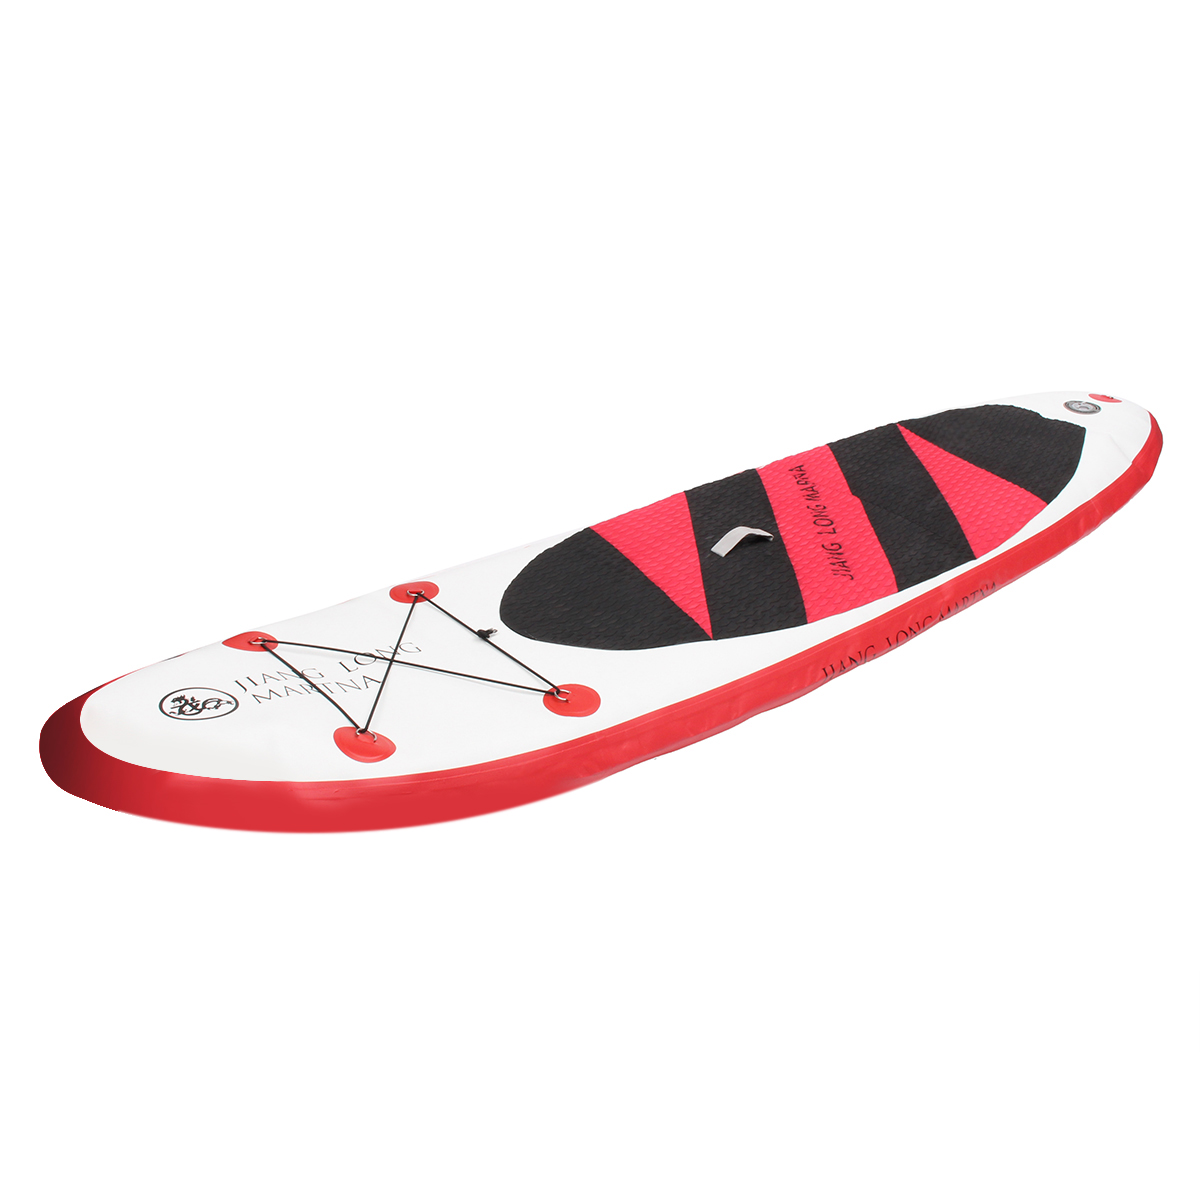 126x315x59-Inch-Inflatable-PVC-Stand-Up-Paddle-Board-Exercise-Training-Surfboard-Paddle-Board-1246897